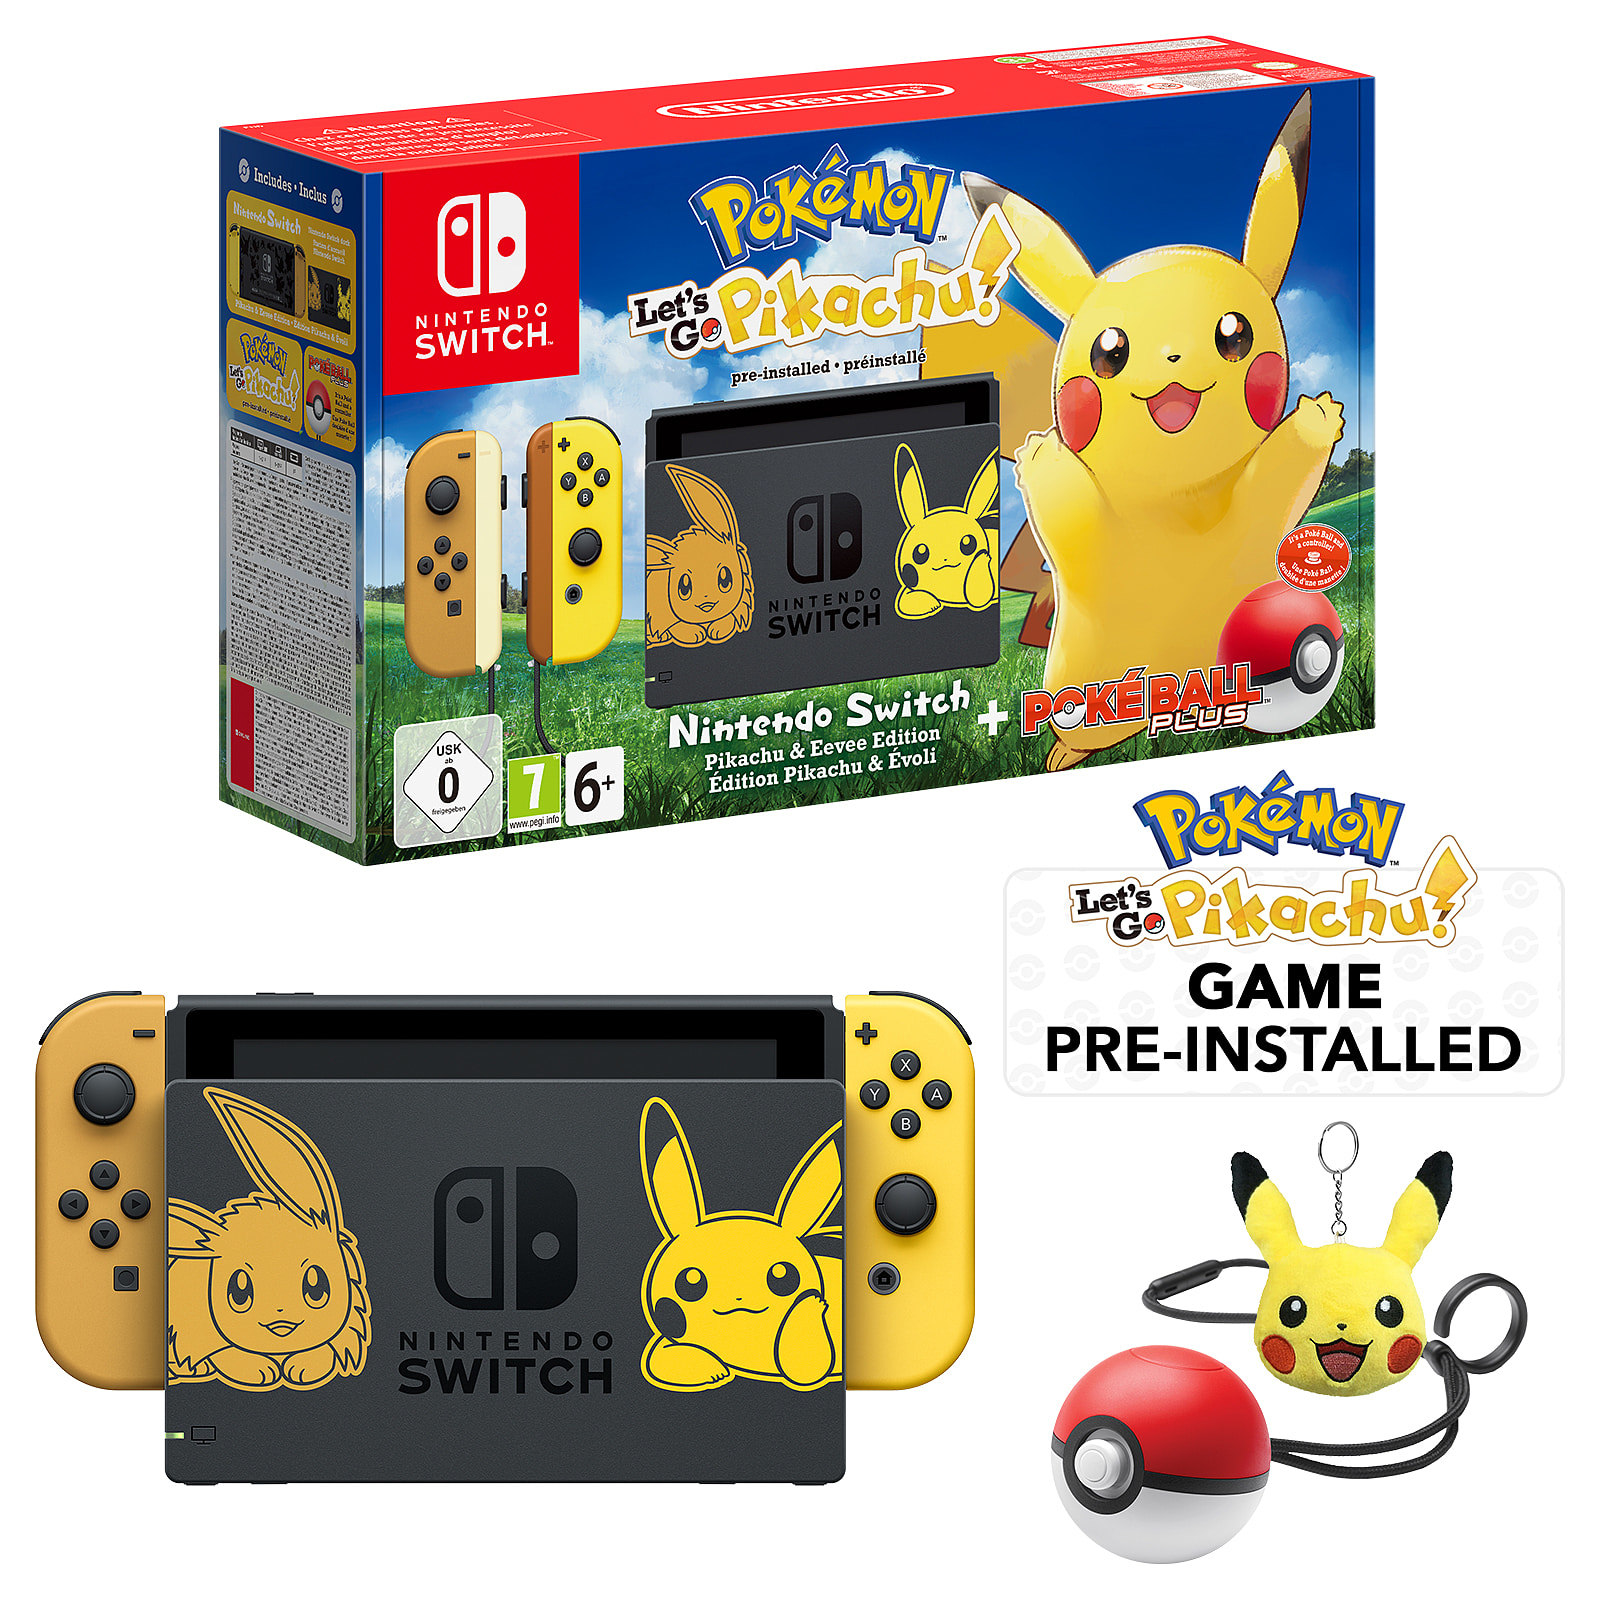 Limited Edition Nintendo Switch Pokemon Let